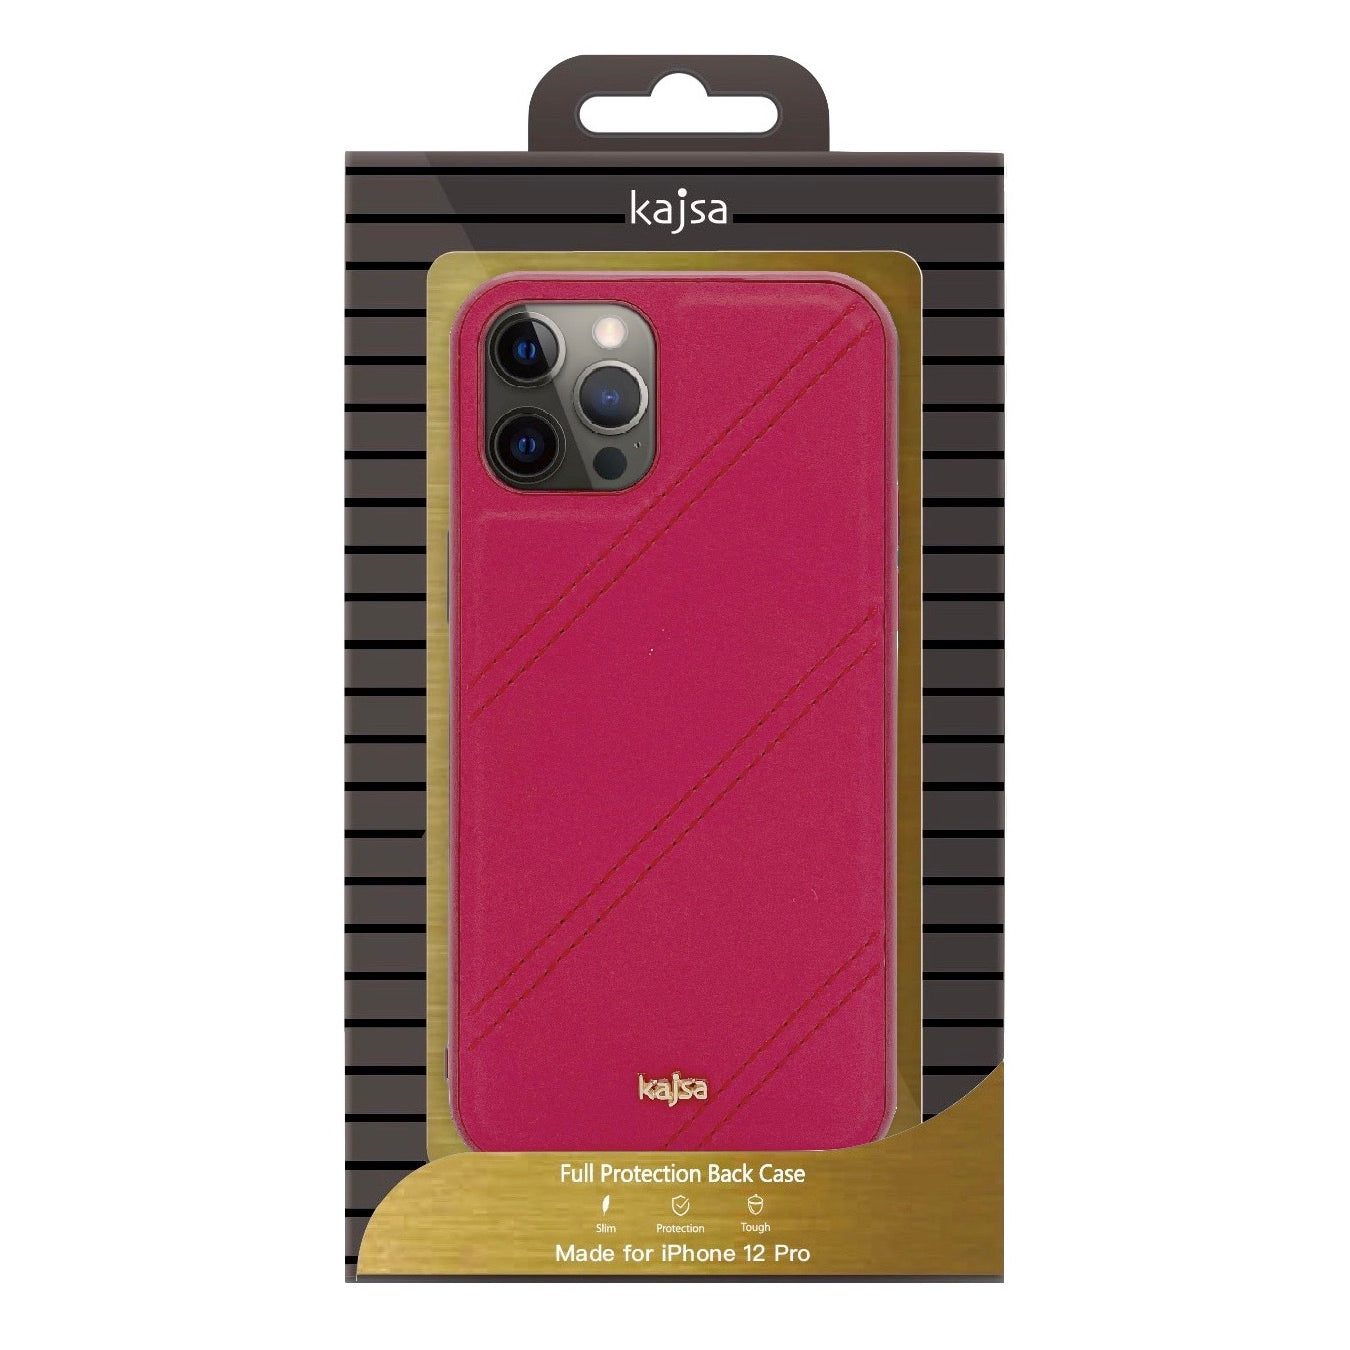 Dale Collection - Double Line I Back Case for iPhone 12-Phone Case- phone case - phone cases- phone cover- iphone cover- iphone case- iphone cases- leather case- leather cases- DIYCASE - custom case - leather cover - hand strap case - croco pattern case - snake pattern case - carbon fiber phone case - phone case brand - unique phone case - high quality - phone case brand - protective case - buy phone case hong kong - online buy phone case - iphone‎手機殼 - 客製化手機殼 - samsung ‎手機殼 - 香港手機殼 - 買電話殼